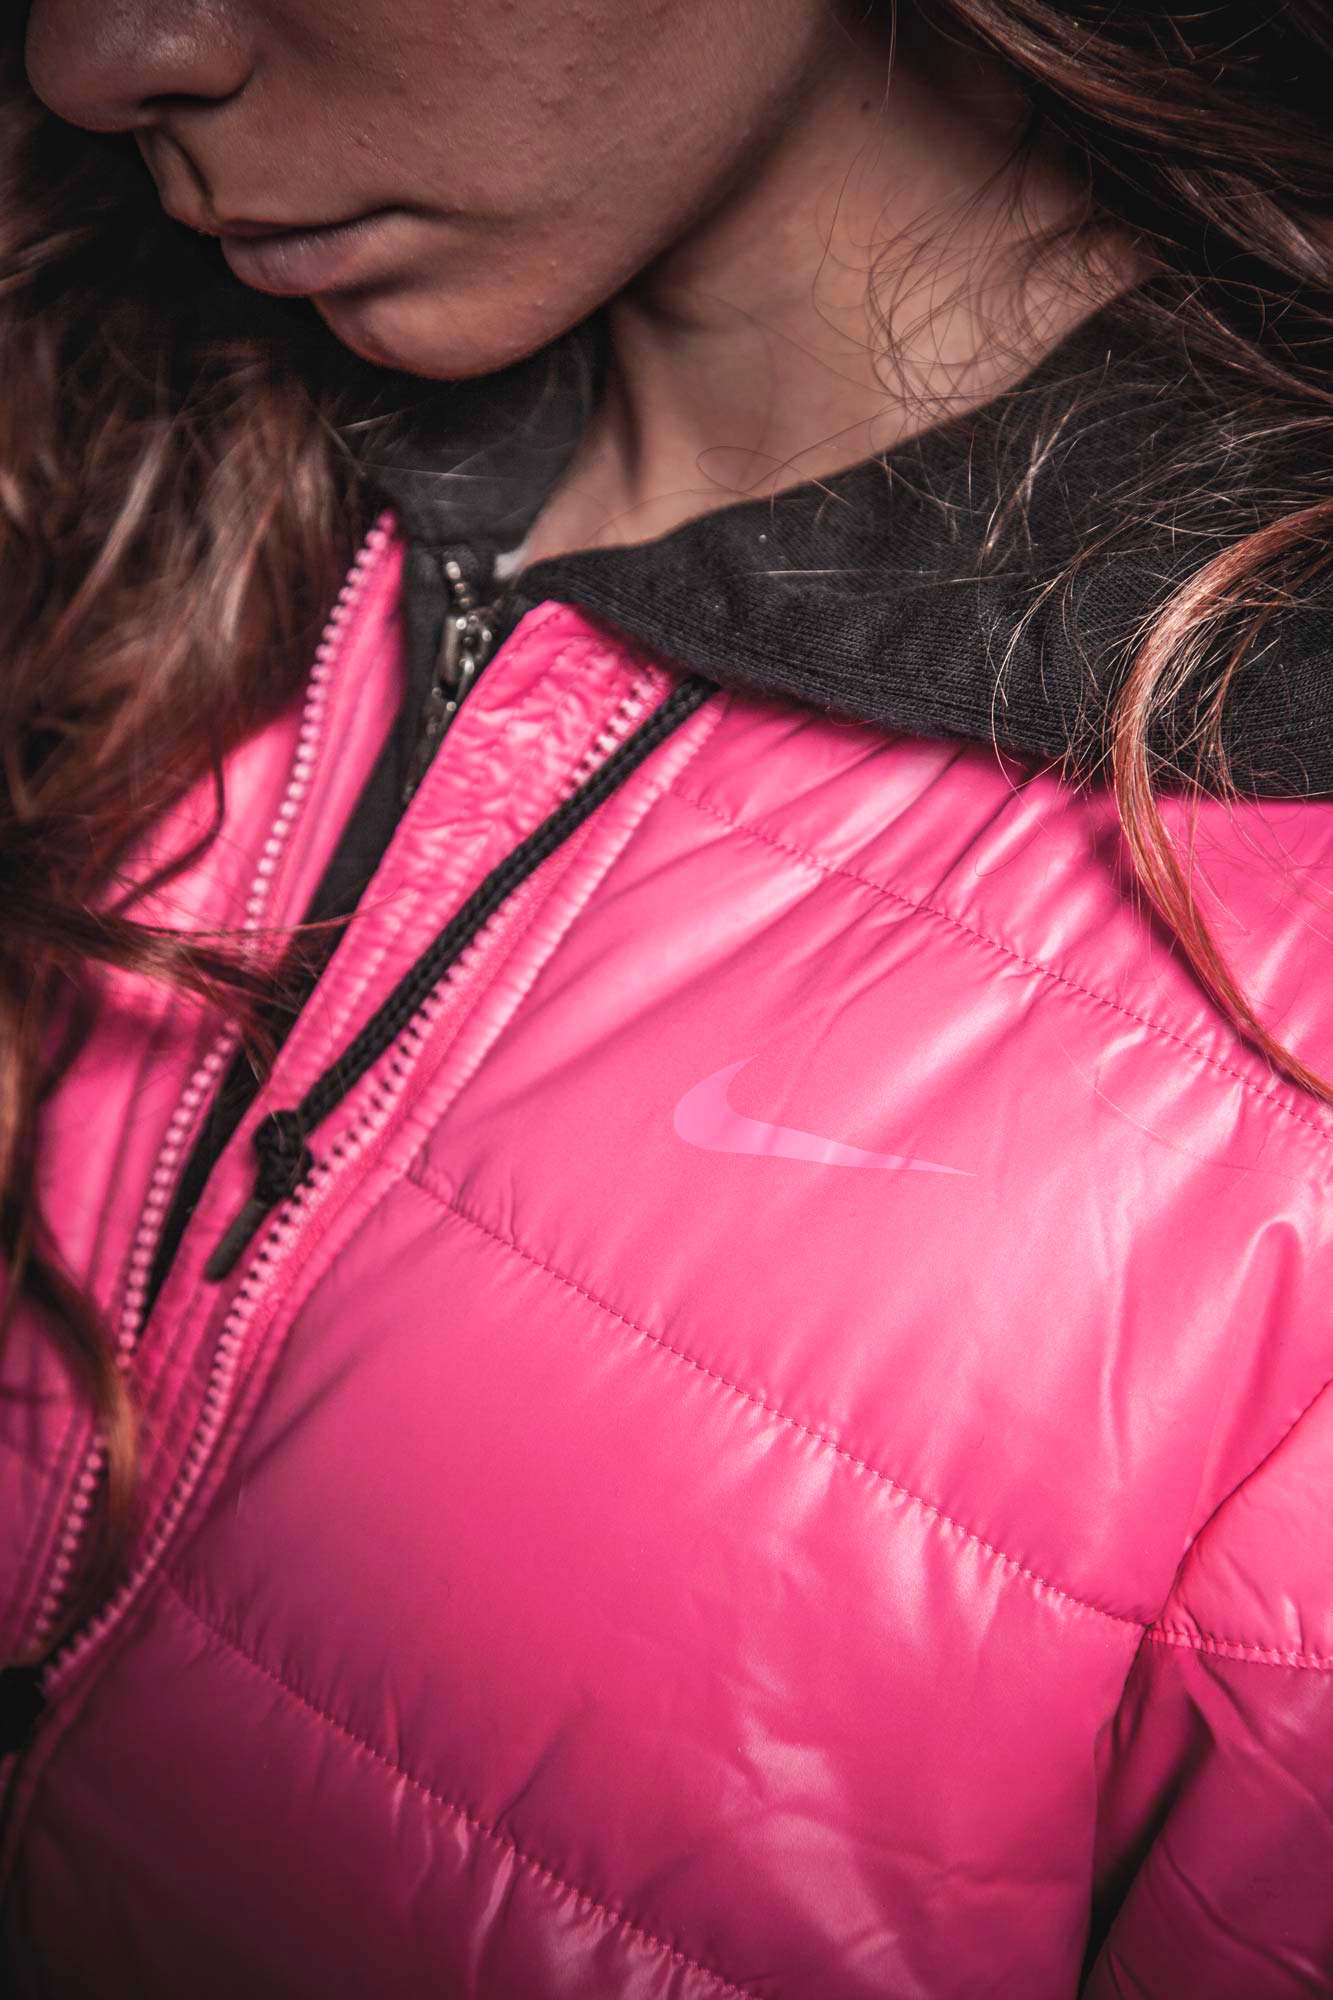 VICTORY - Women's Padded Jacket